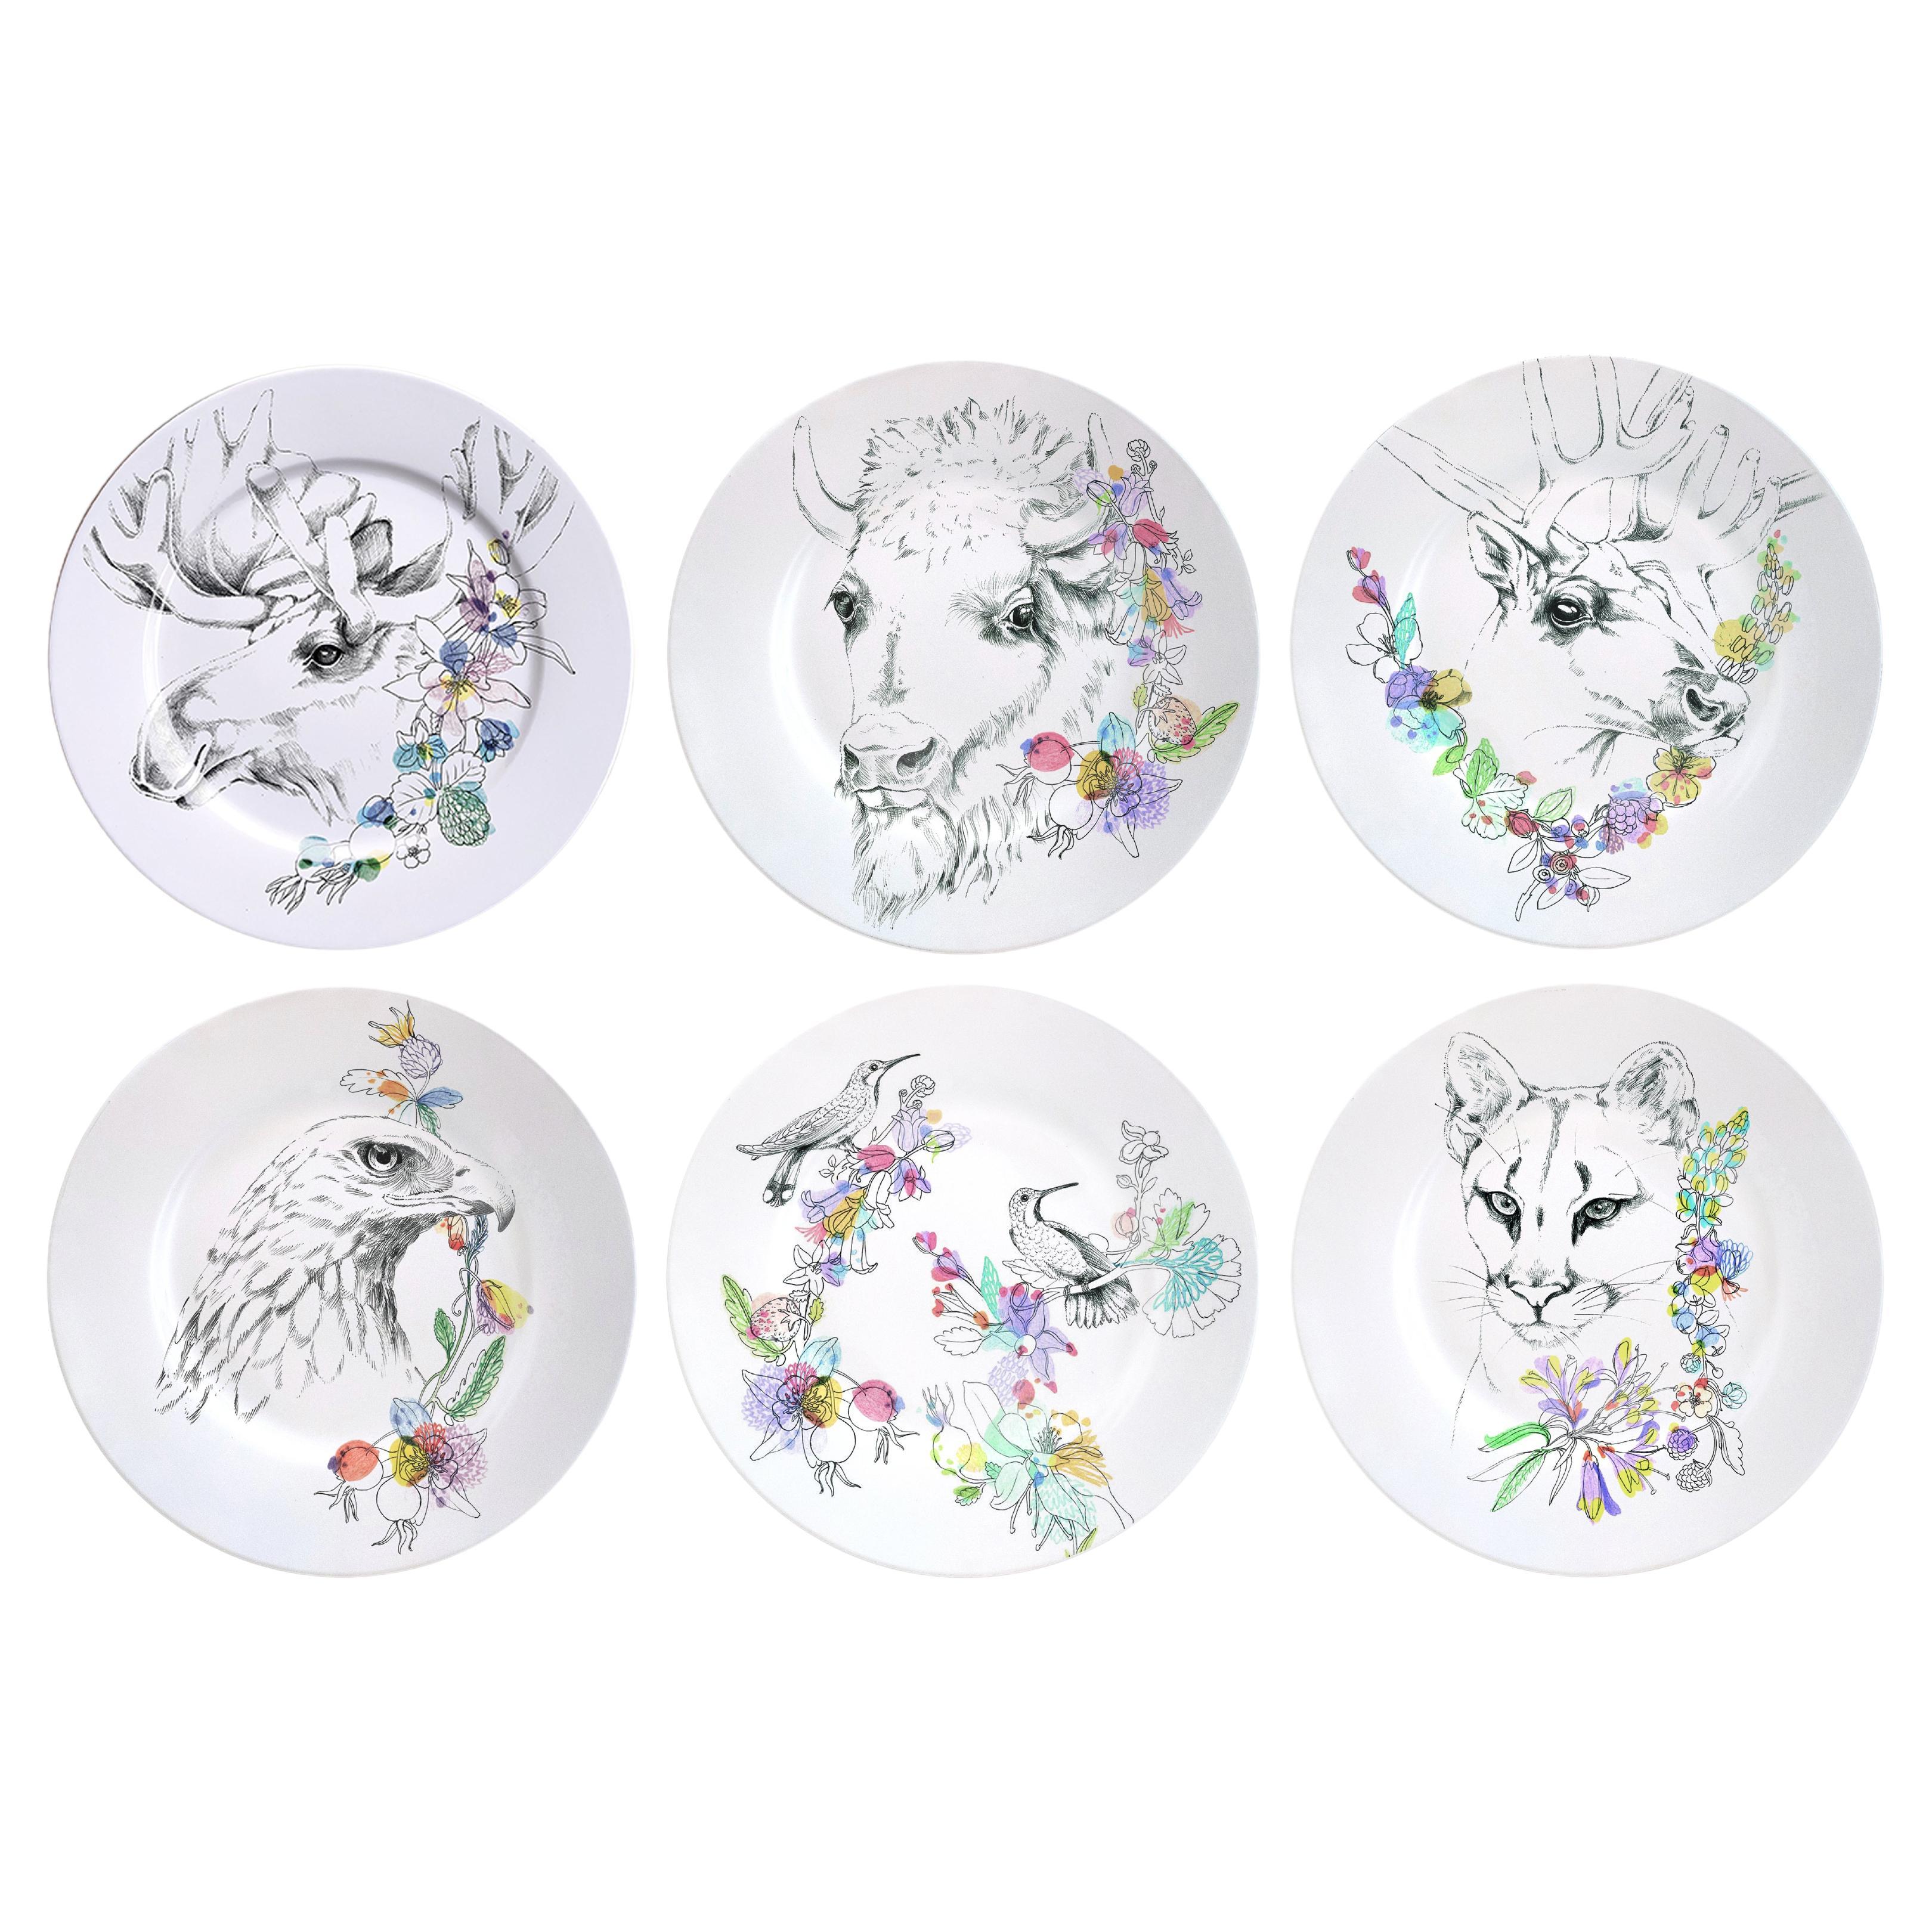 Ode to the Woods, Six Contemporary Porcelain Dinner Plates with Animals&Flowers